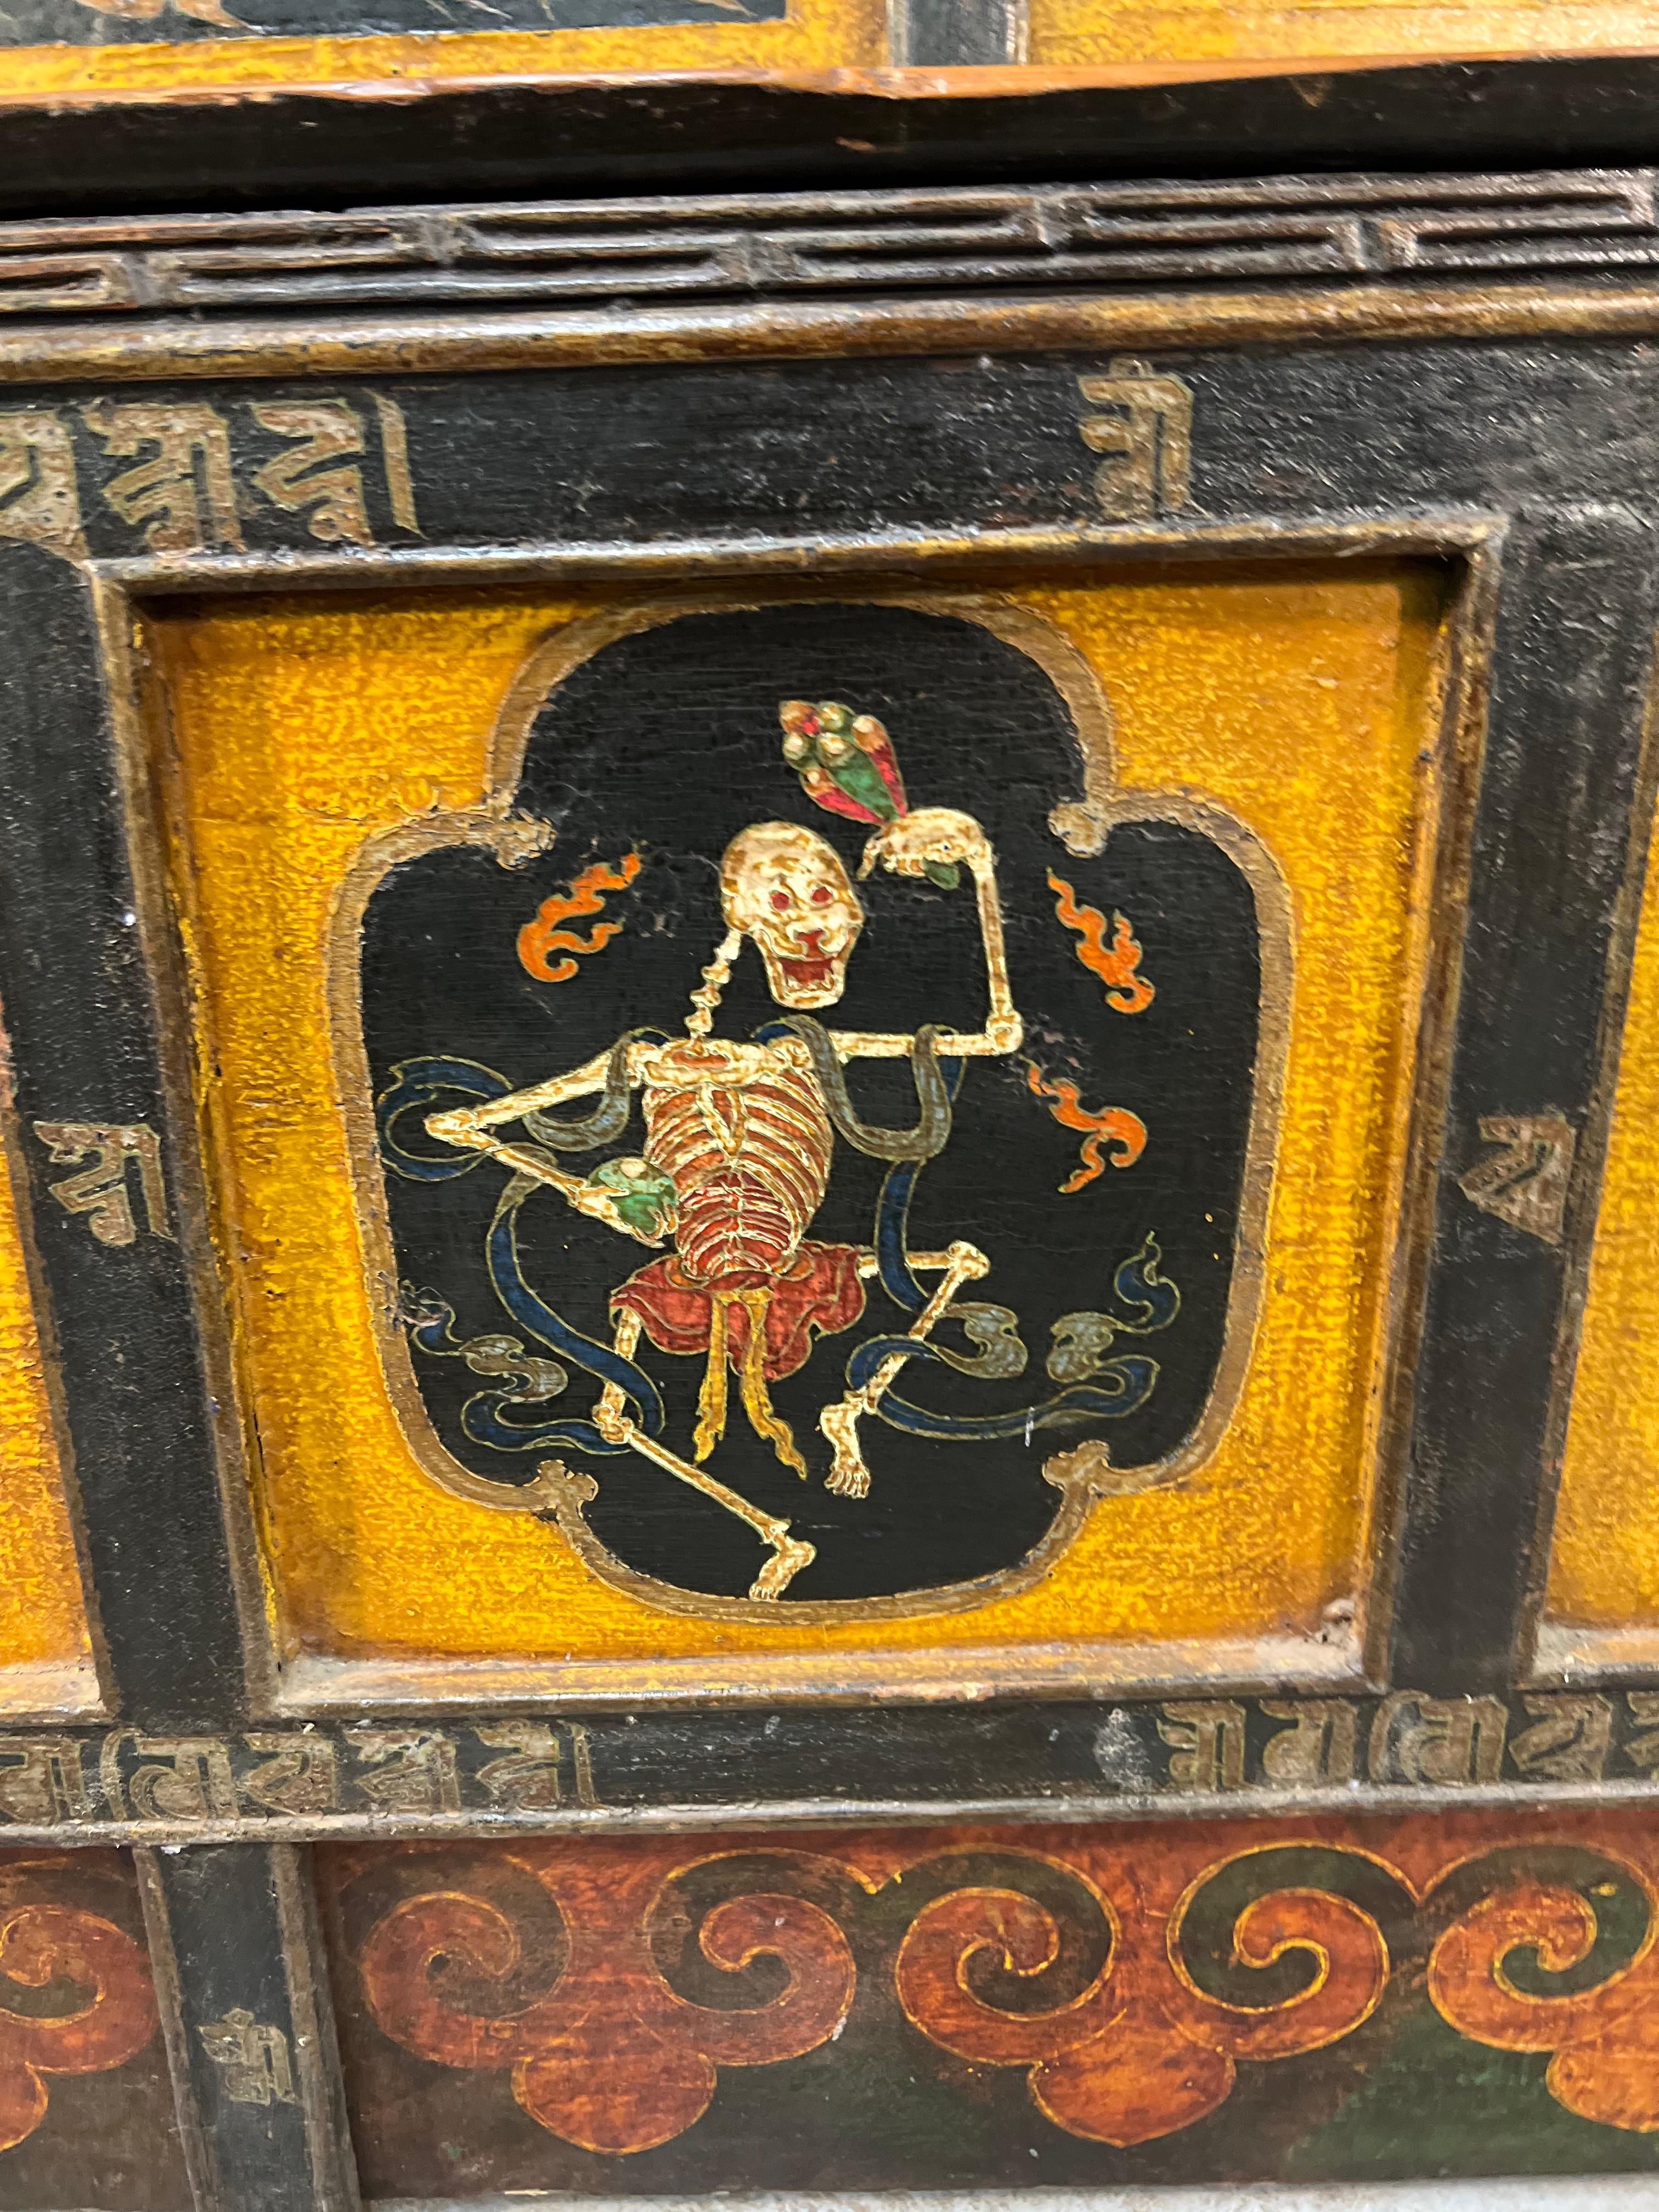 Hand-Crafted Tibetan Alter Table in a Yellow, Black and Red Painted Finish For Sale